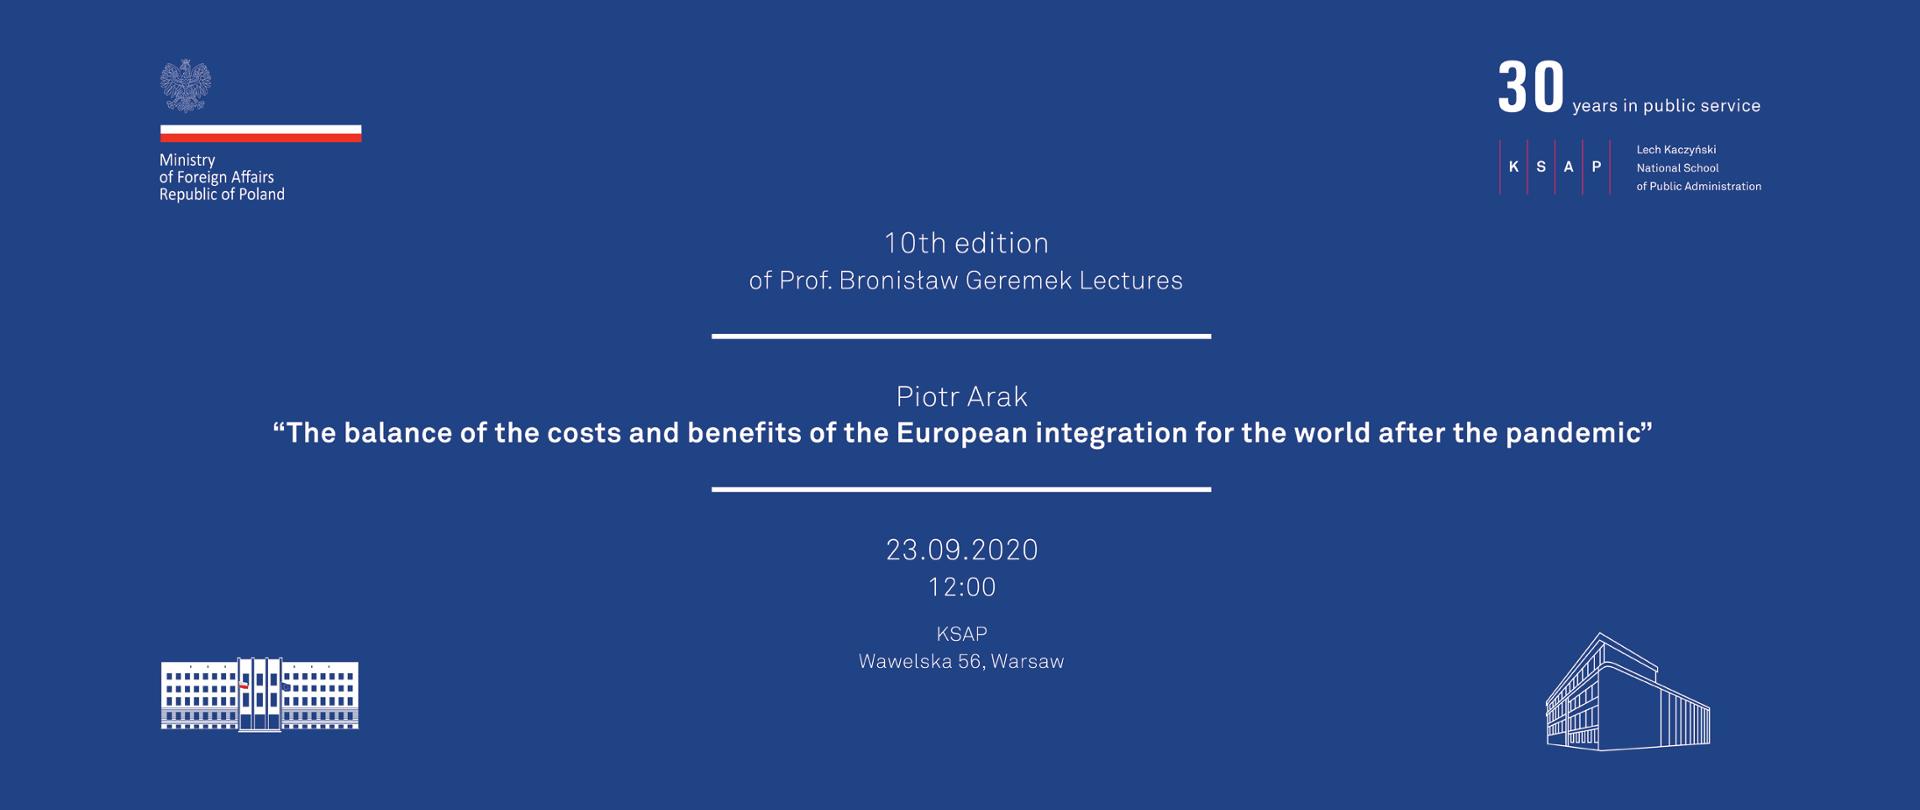 10th edition of Prof. Bronisław Geremek Lectures